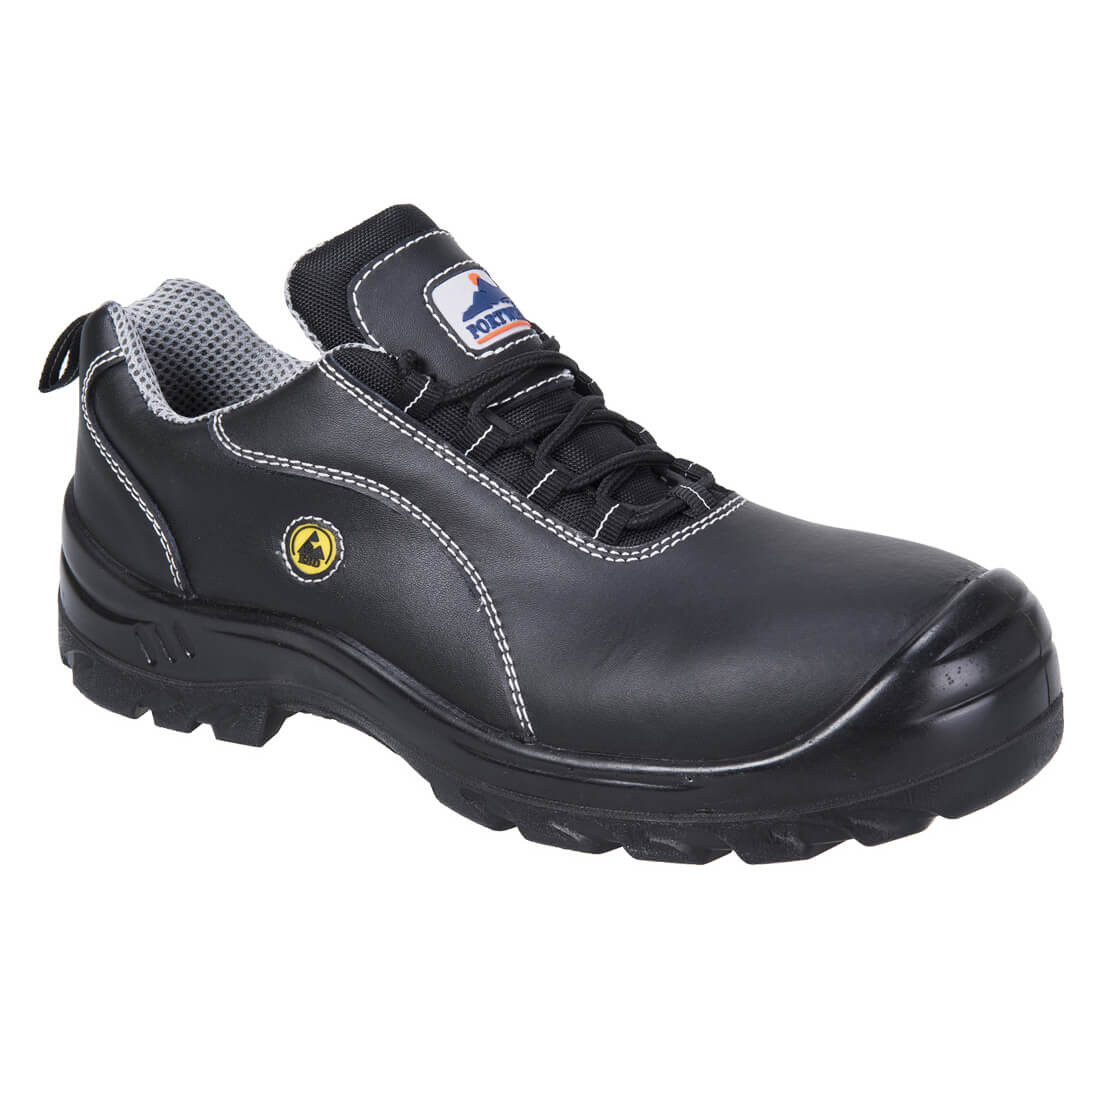 Compositelite™ ESD Leather Safety Shoe S1 - Footwear